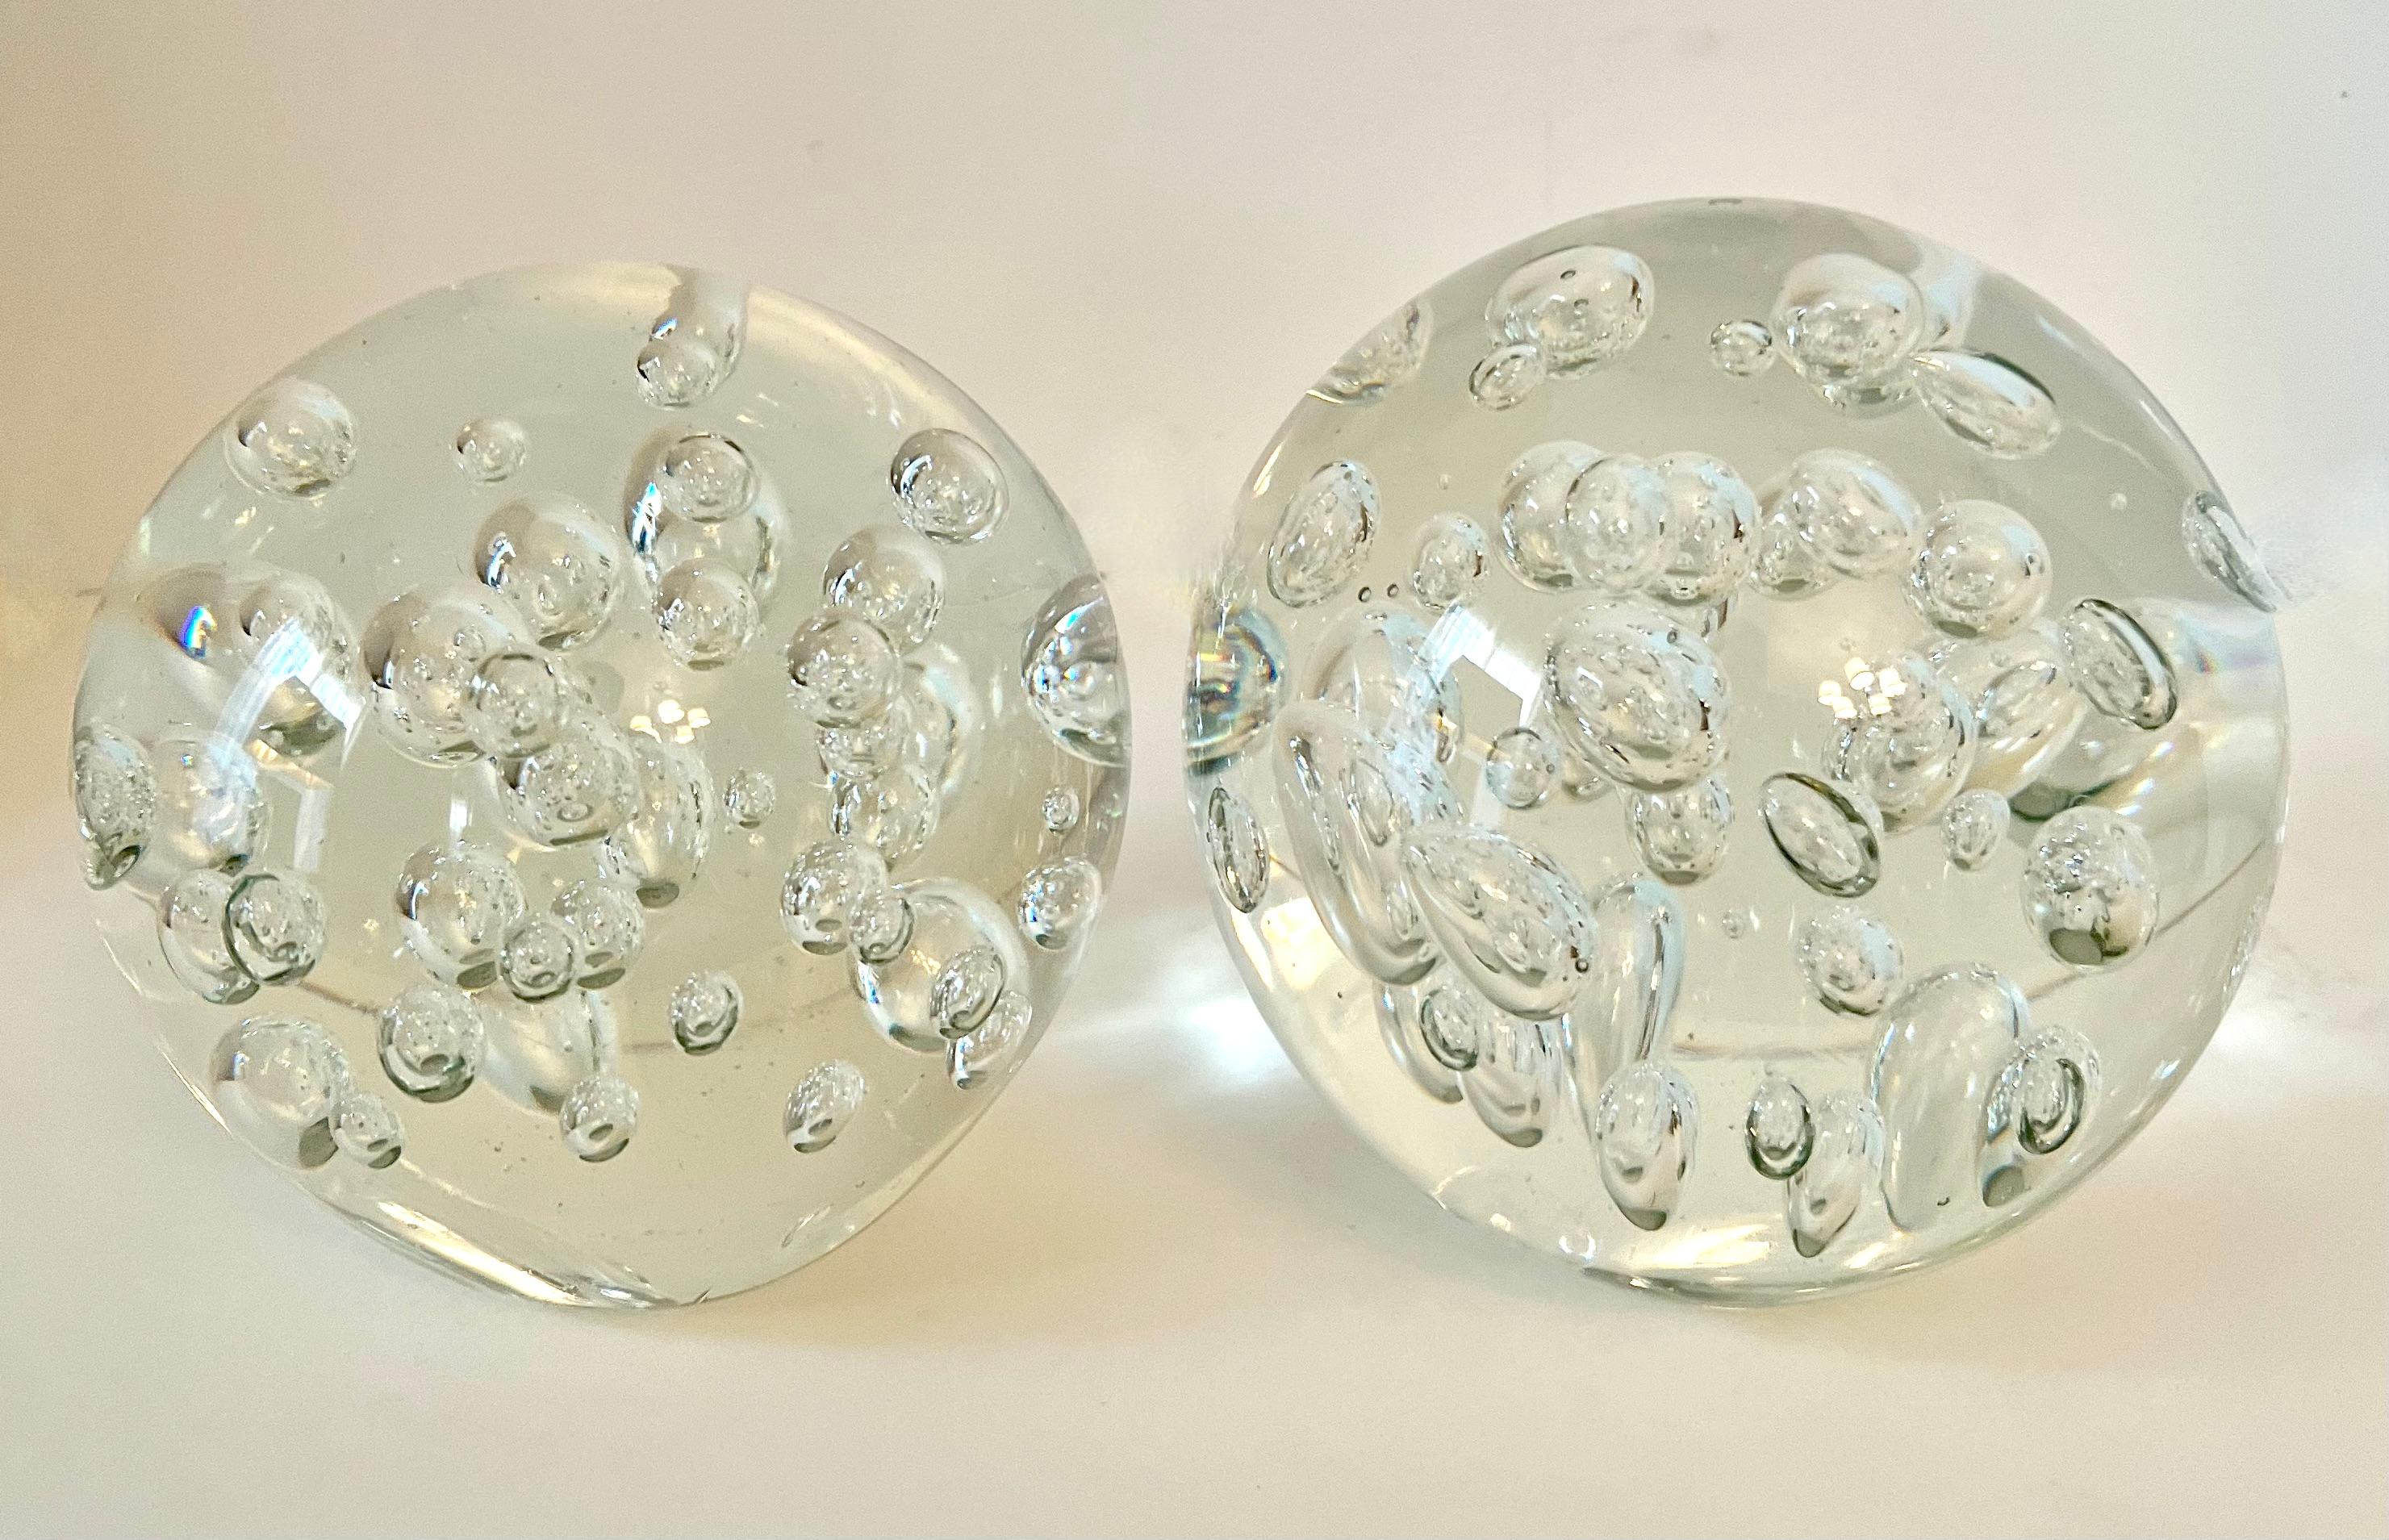 Two Clear Paperweights with bubbles.  The pair are very large at measure 5 7/8